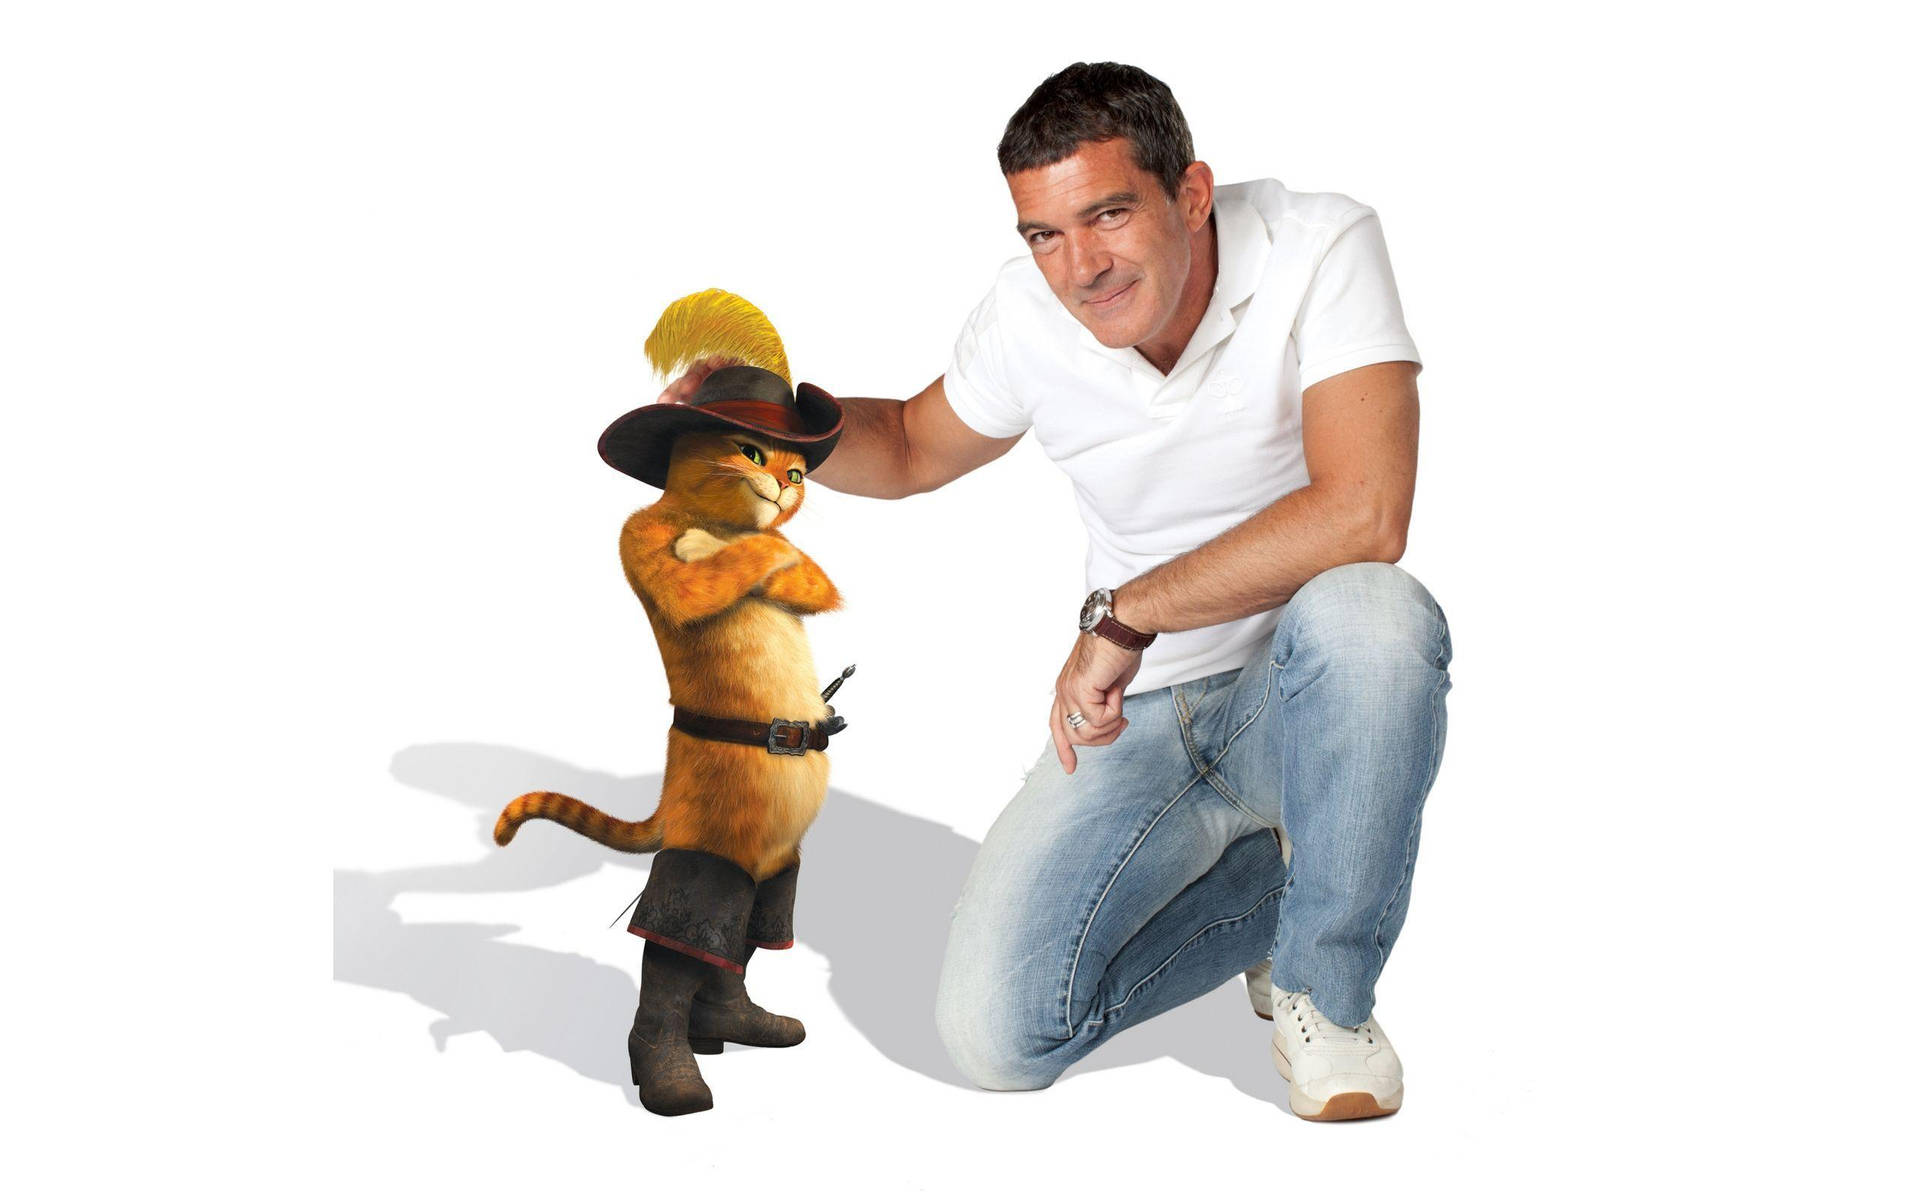 Antonio Banderas as the charismatic Puss in Boots with Kitty Softpaws Wallpaper